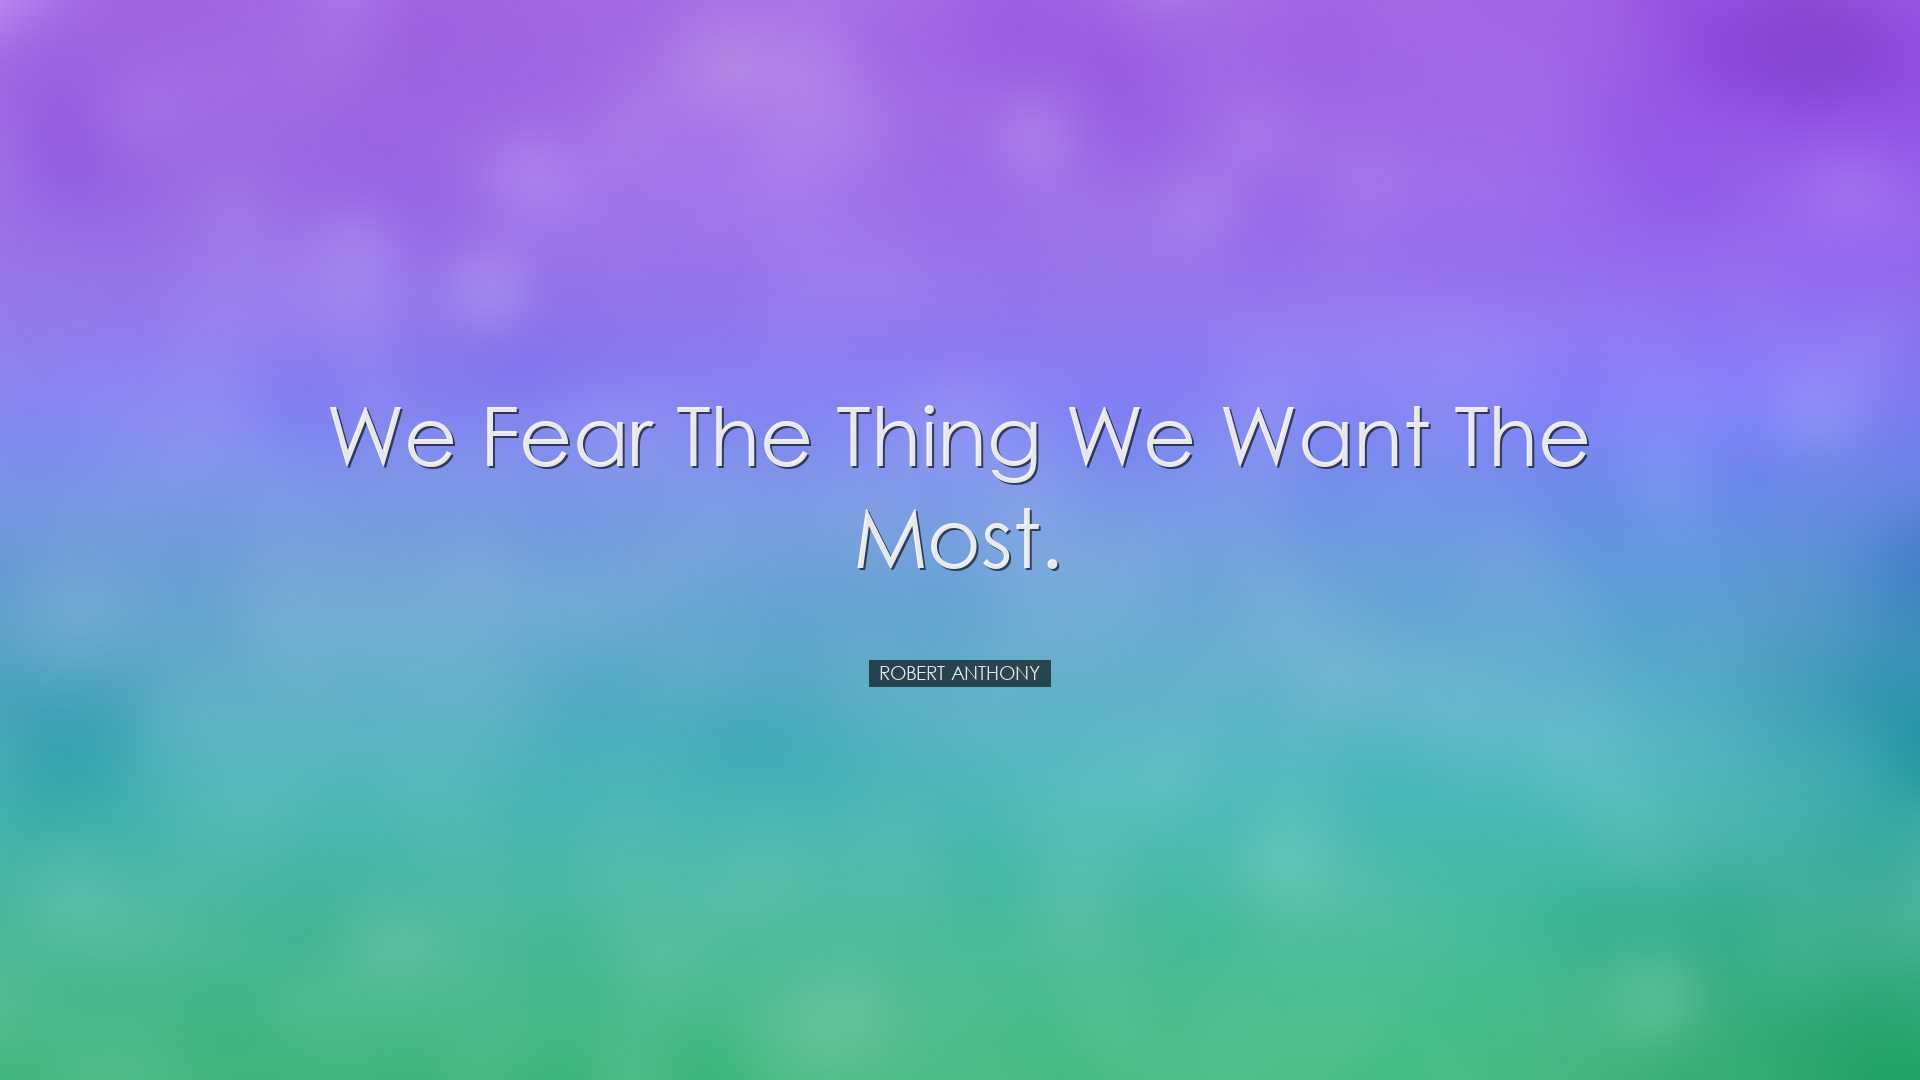 We fear the thing we want the most. - Robert Anthony